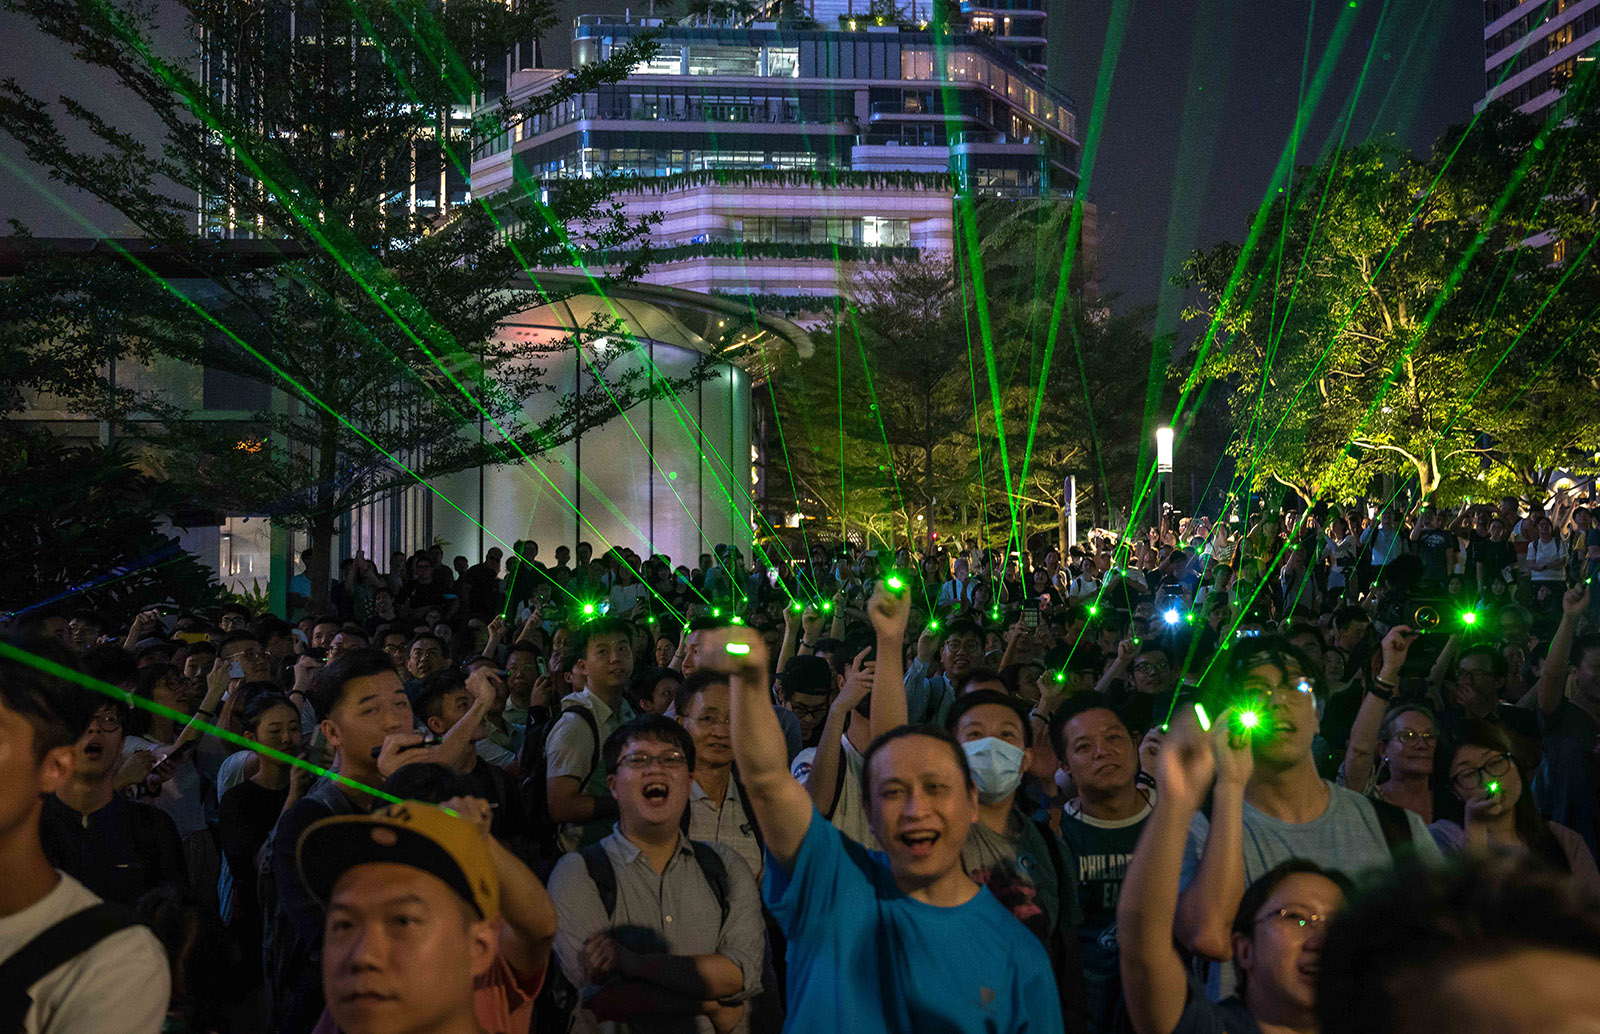 Laser pointers being used by protesters in Hong Kong in an effort to defeat surveillance cameras and facial recognition software used by the authorities, China, August 7, 2019